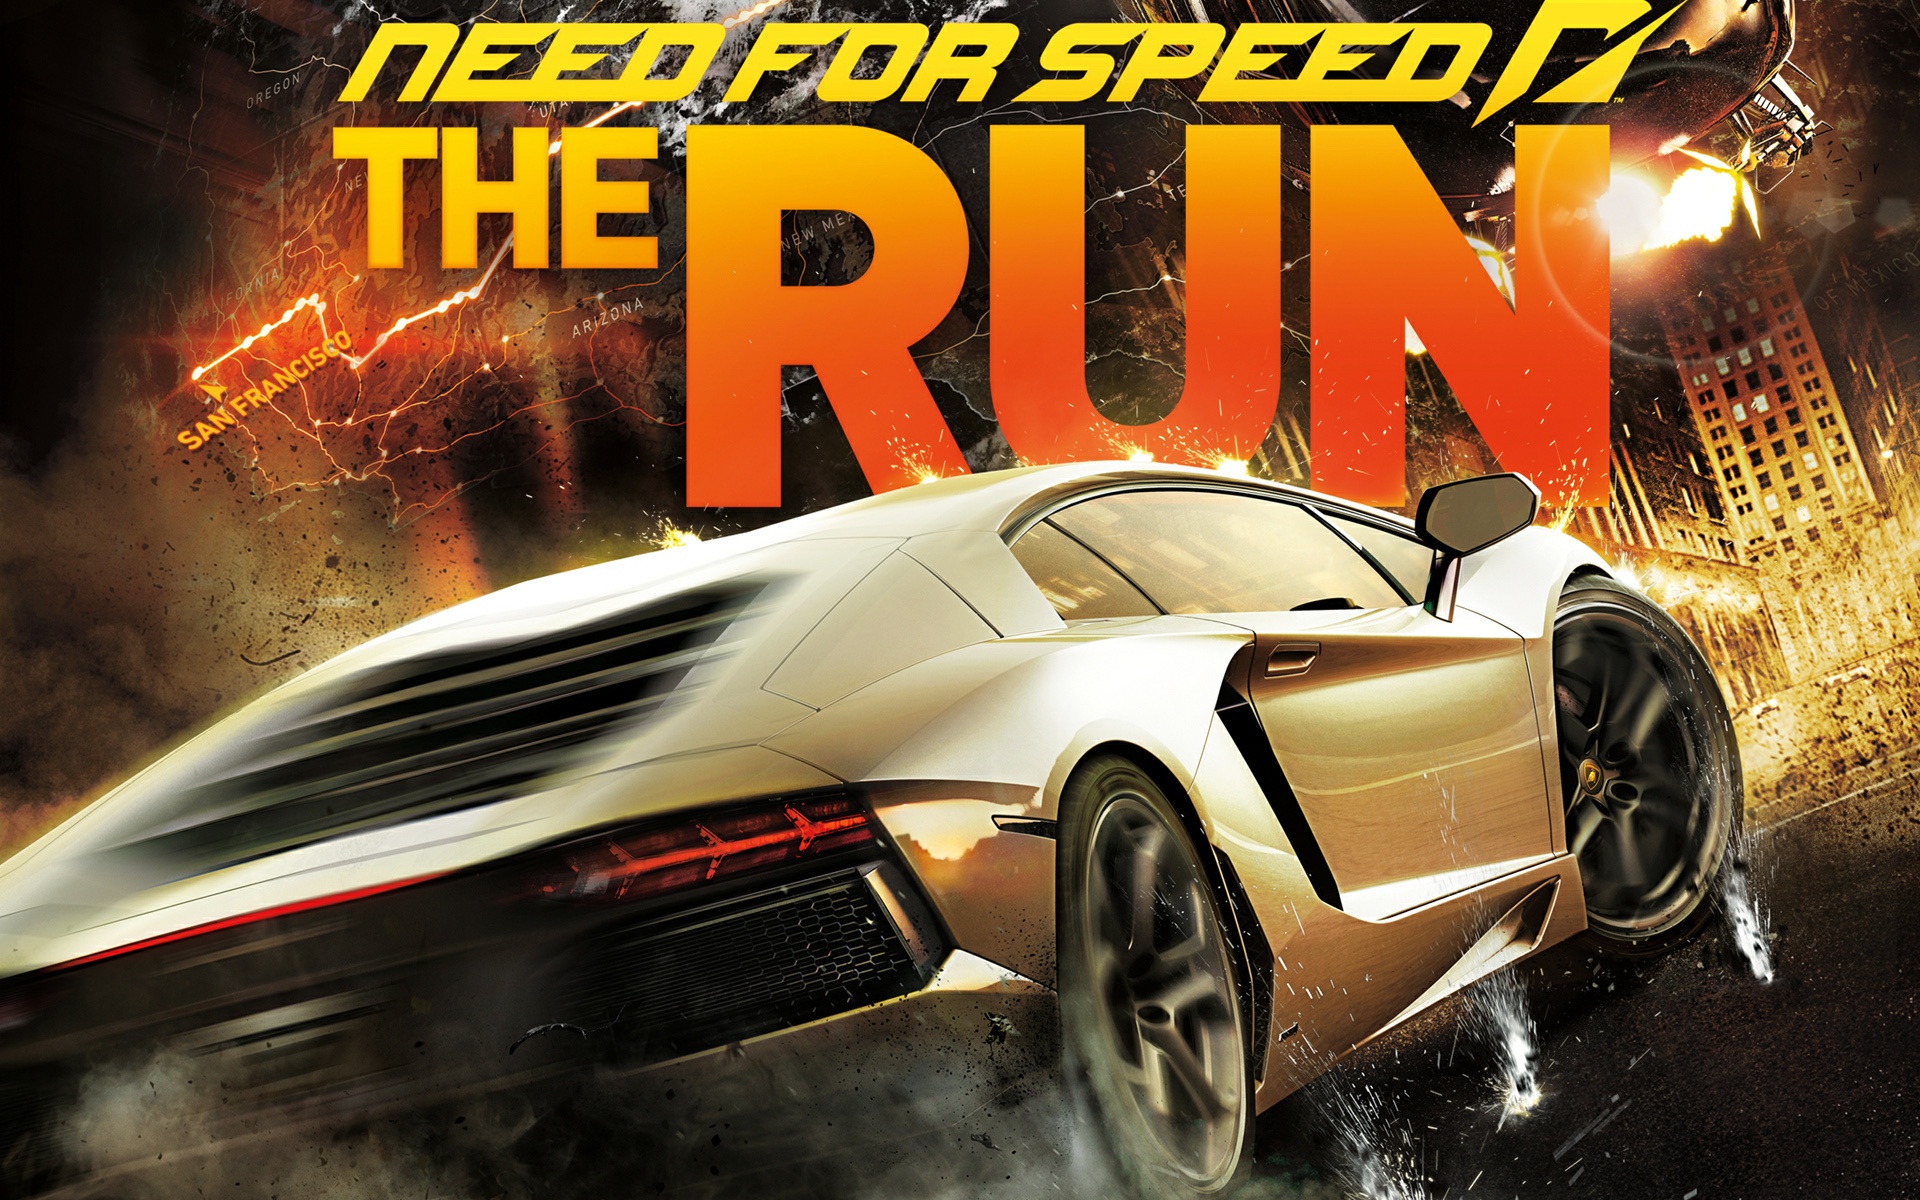 Need For Speed: The Run Backgrounds, Compatible - PC, Mobile, Gadgets| 1920x1200 px